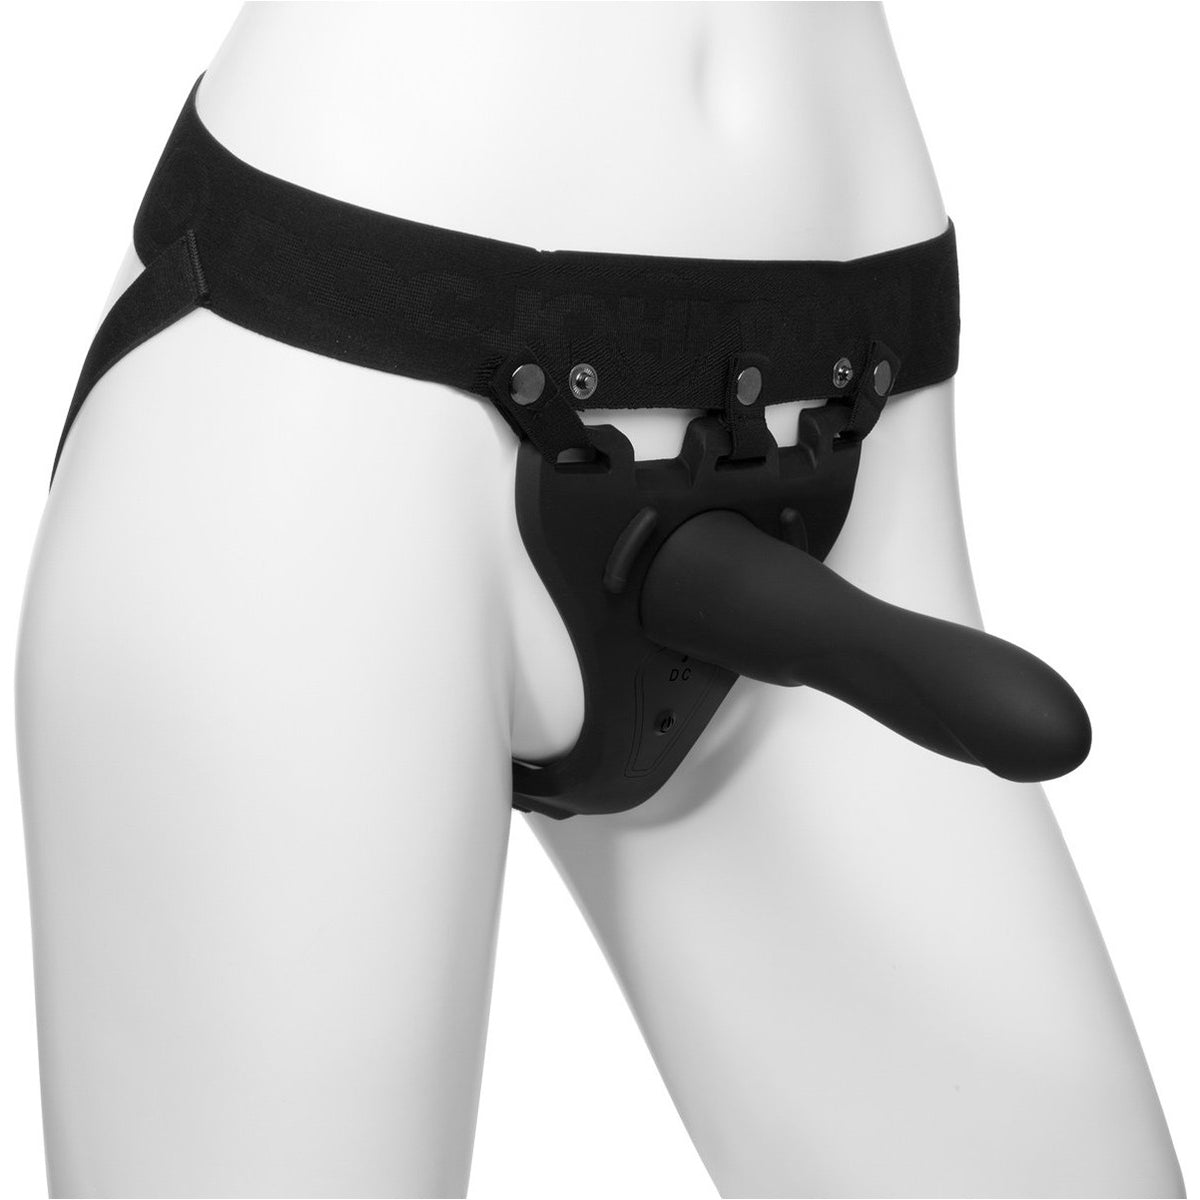 Doc Johnson Body Extensions – Be in Charge 2 Piece Strap-On Set with Vibrating Harness